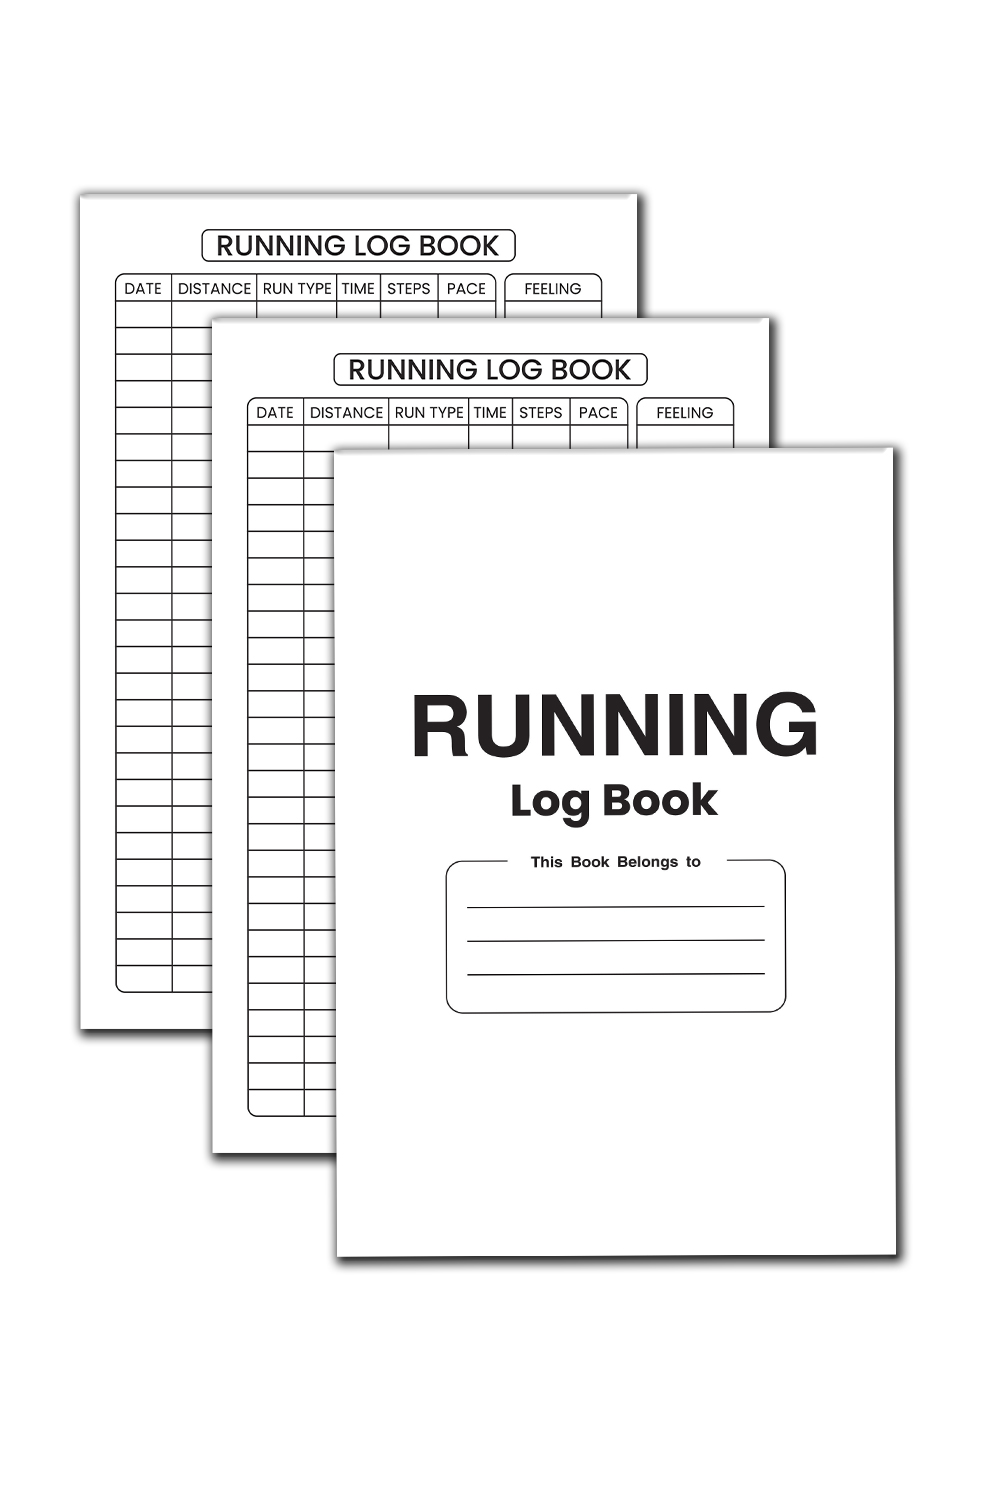 Image with blank colorful cover and pages of running log book.